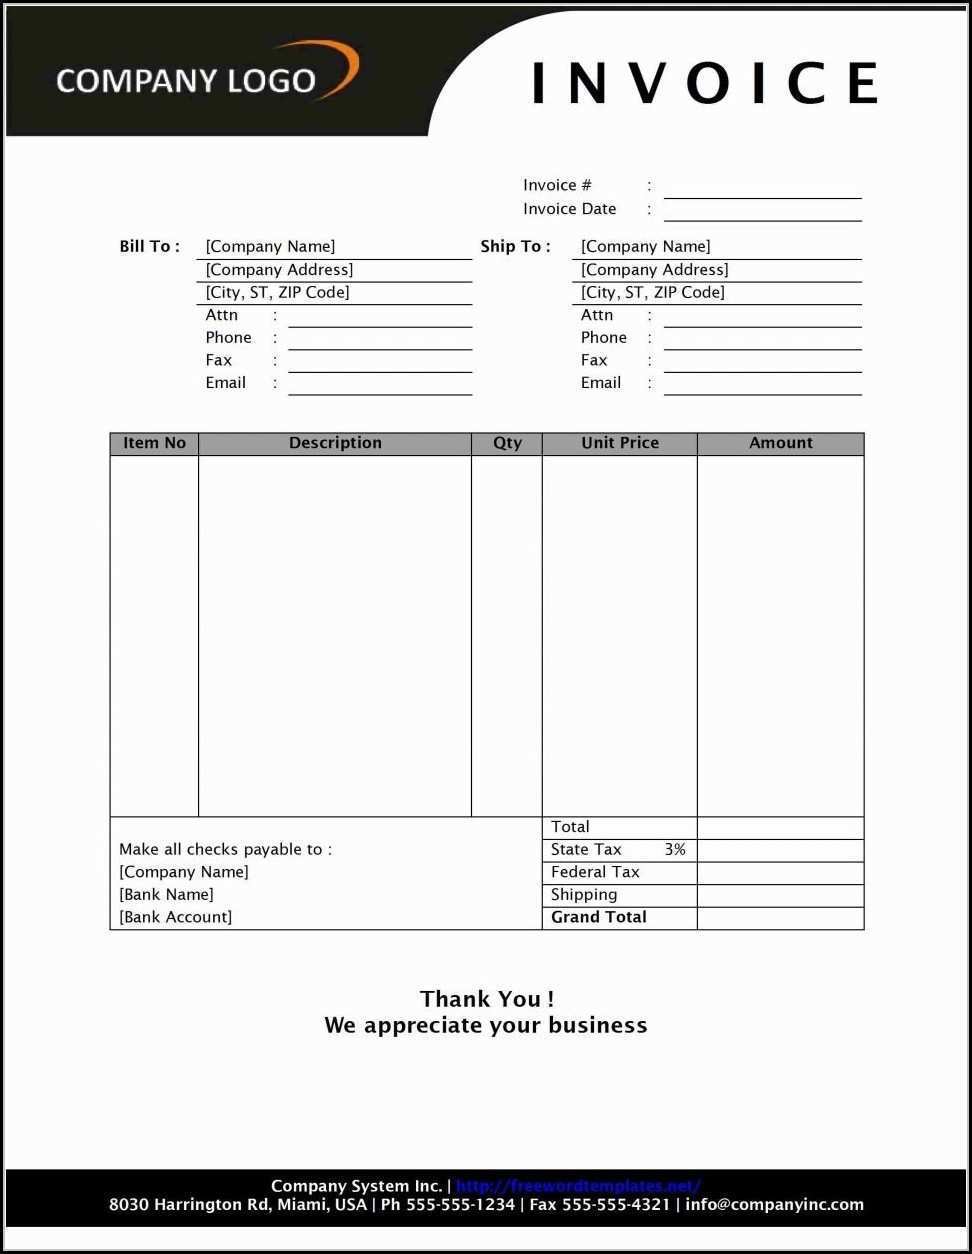 74 Free Invoice Template Uk Without Vat Photo with Invoice Template Uk Without Vat